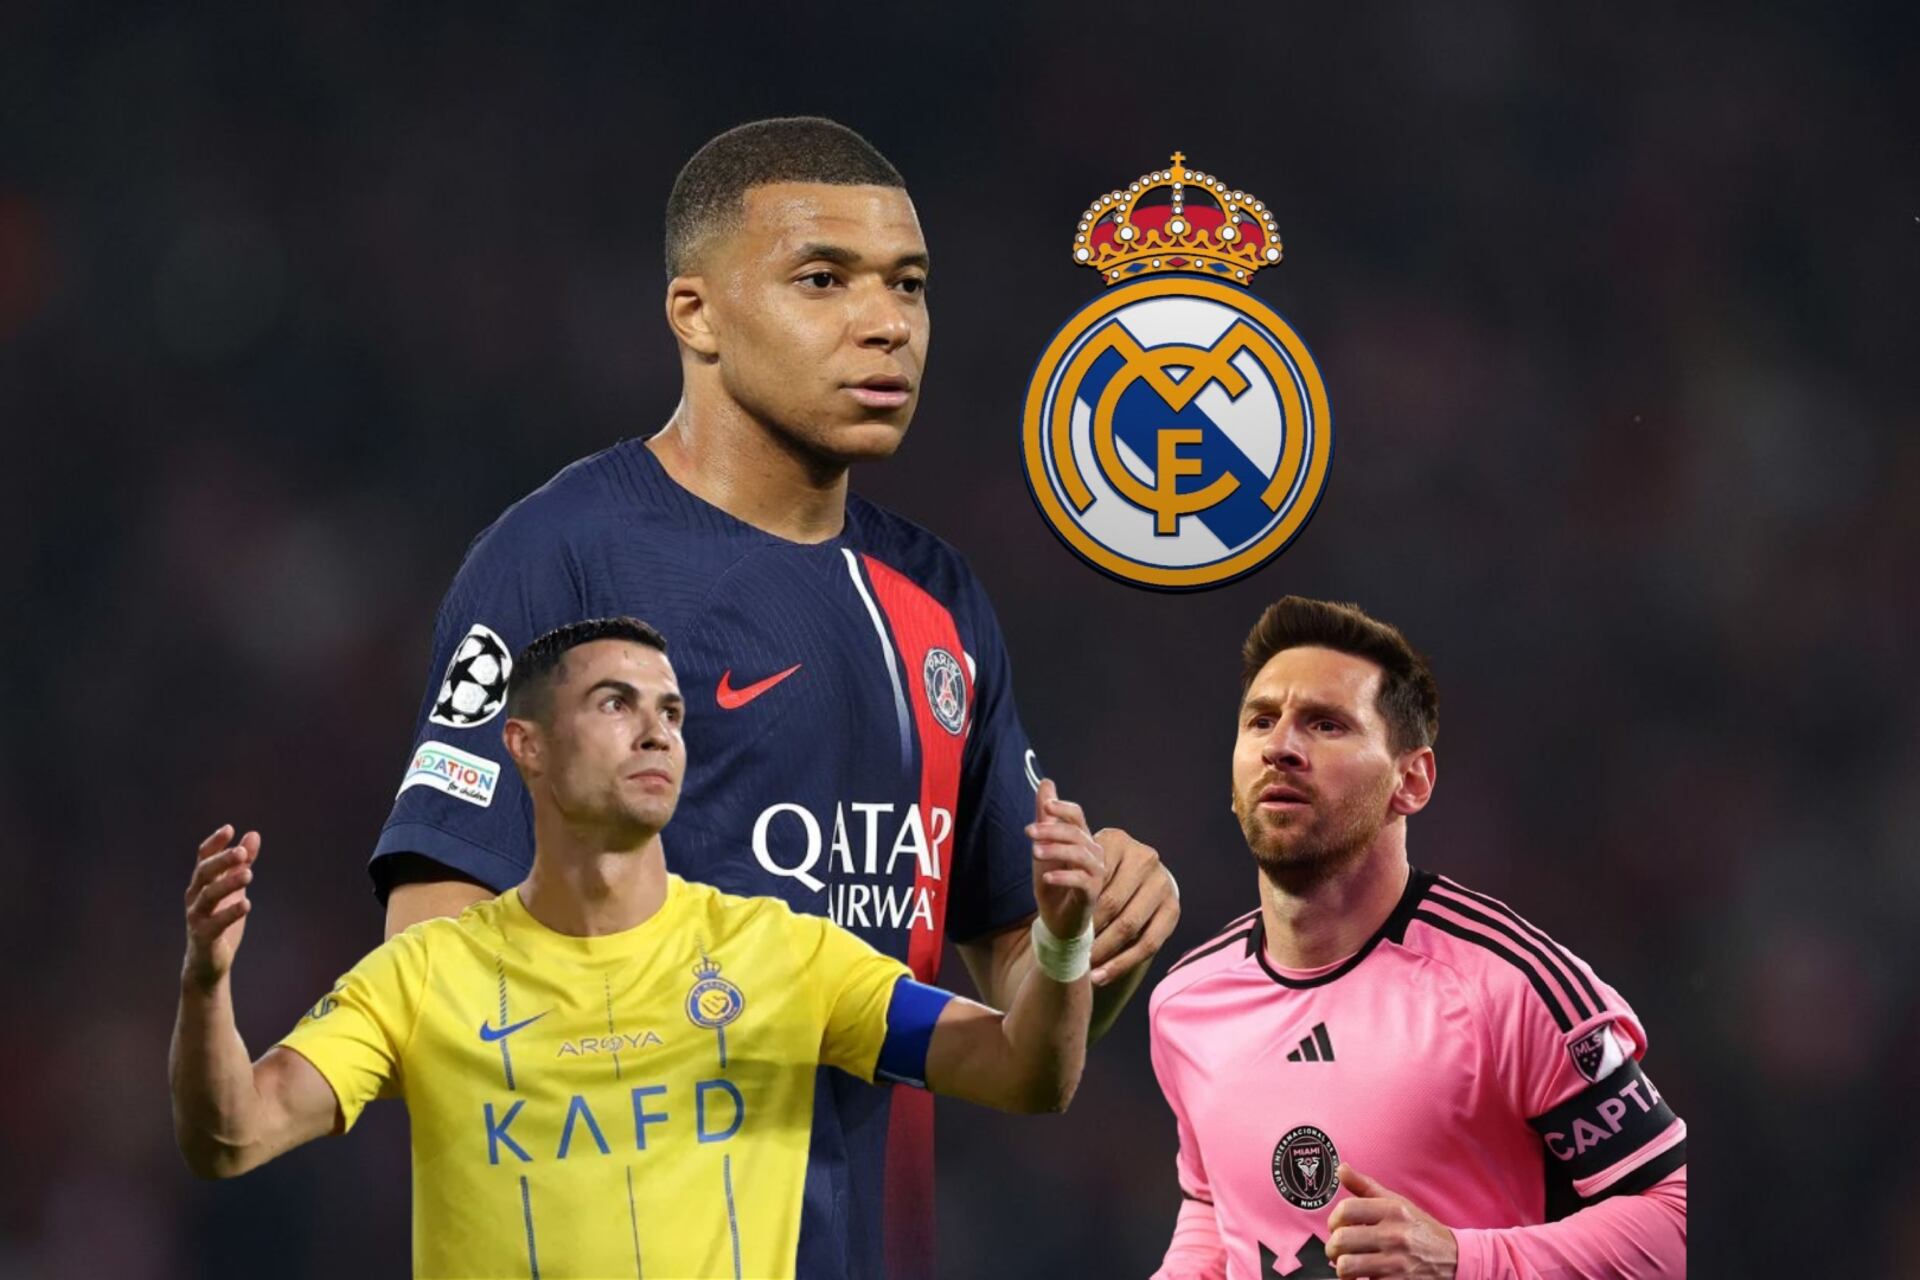 He would have earned more than Cristiano or Messi, the incredible Saudi offer Mbappé rejected to play in Real Madrid